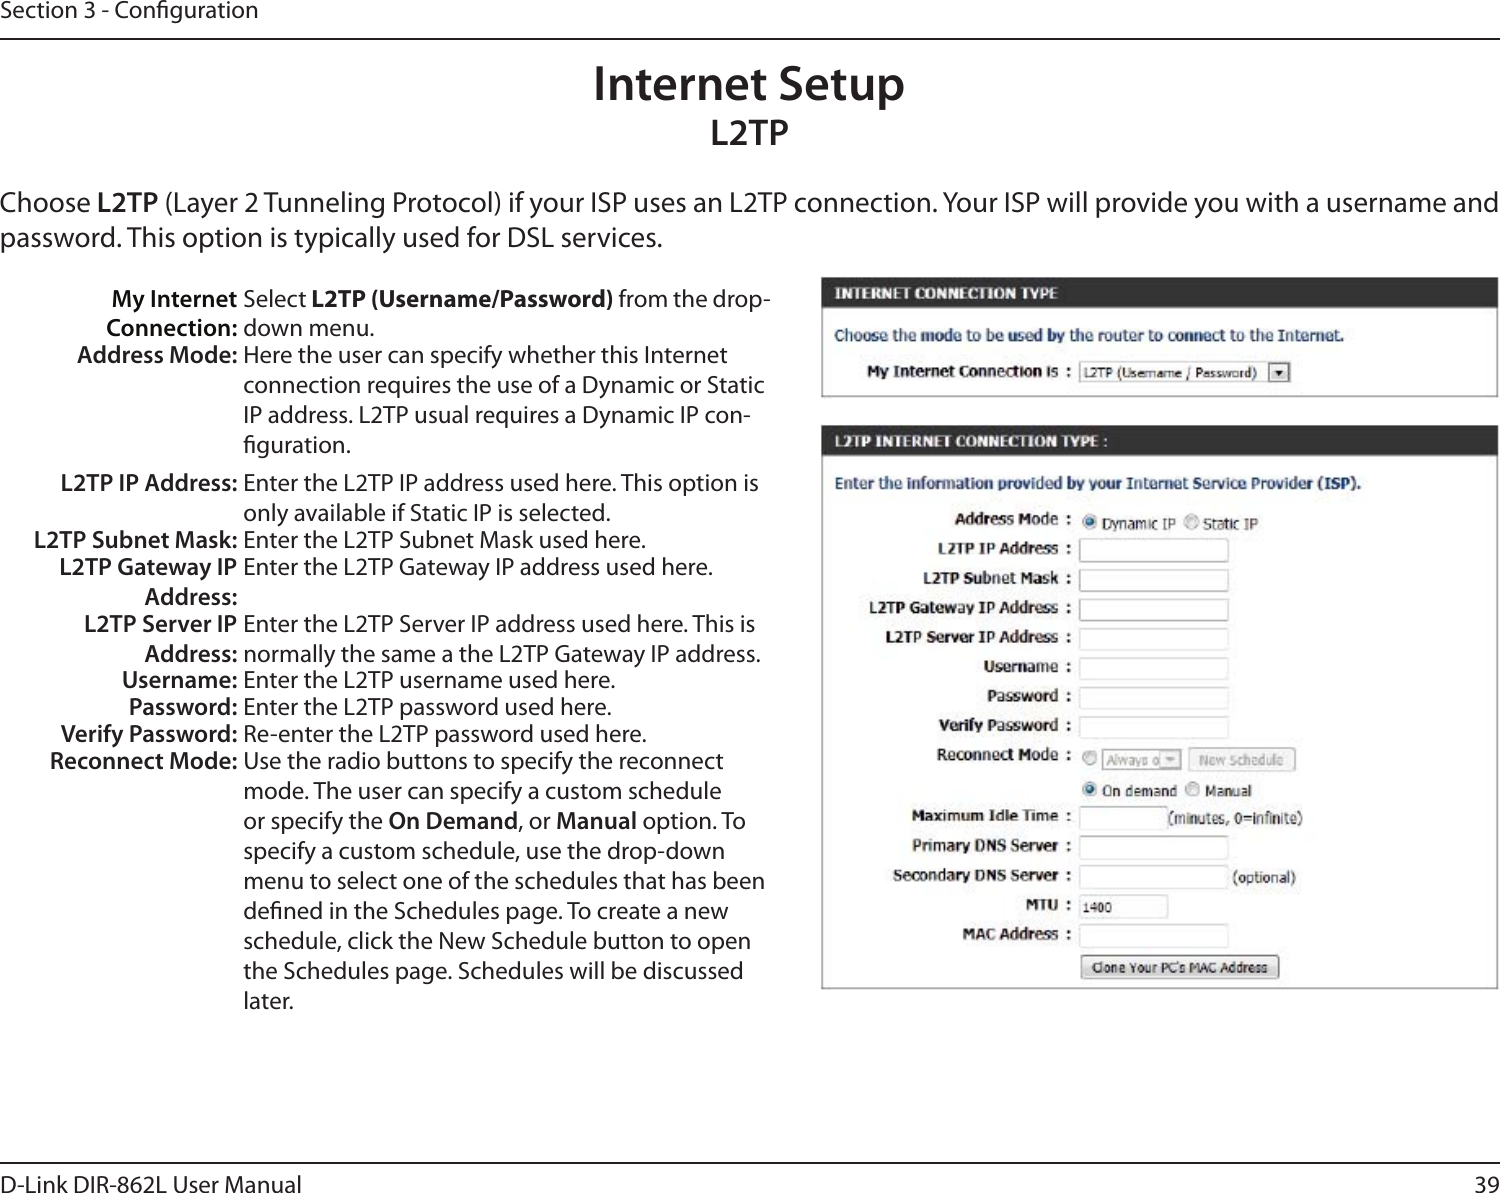 39D-Link DIR-862L User ManualSection 3 - CongurationInternet SetupL2TPChoose L2TP (Layer 2 Tunneling Protocol) if your ISP uses an L2TP connection. Your ISP will provide you with a username and password. This option is typically used for DSL services. My Internet Connection:Select L2TP (Username/Password) from the drop-down menu.Address Mode: Here the user can specify whether this Internet connection requires the use of a Dynamic or Static IP address. L2TP usual requires a Dynamic IP con-guration.L2TP IP Address: Enter the L2TP IP address used here. This option is only available if Static IP is selected.L2TP Subnet Mask: Enter the L2TP Subnet Mask used here.L2TP Gateway IP Address:Enter the L2TP Gateway IP address used here.L2TP Server IP Address:Enter the L2TP Server IP address used here. This is normally the same a the L2TP Gateway IP address.Username: Enter the L2TP username used here.Password: Enter the L2TP password used here.Verify Password: Re-enter the L2TP password used here.Reconnect Mode: Use the radio buttons to specify the reconnect mode. The user can specify a custom schedule or specify the On Demand, or Manual option. To specify a custom schedule, use the drop-down menu to select one of the schedules that has been dened in the Schedules page. To create a new schedule, click the New Schedule button to open the Schedules page. Schedules will be discussed later.